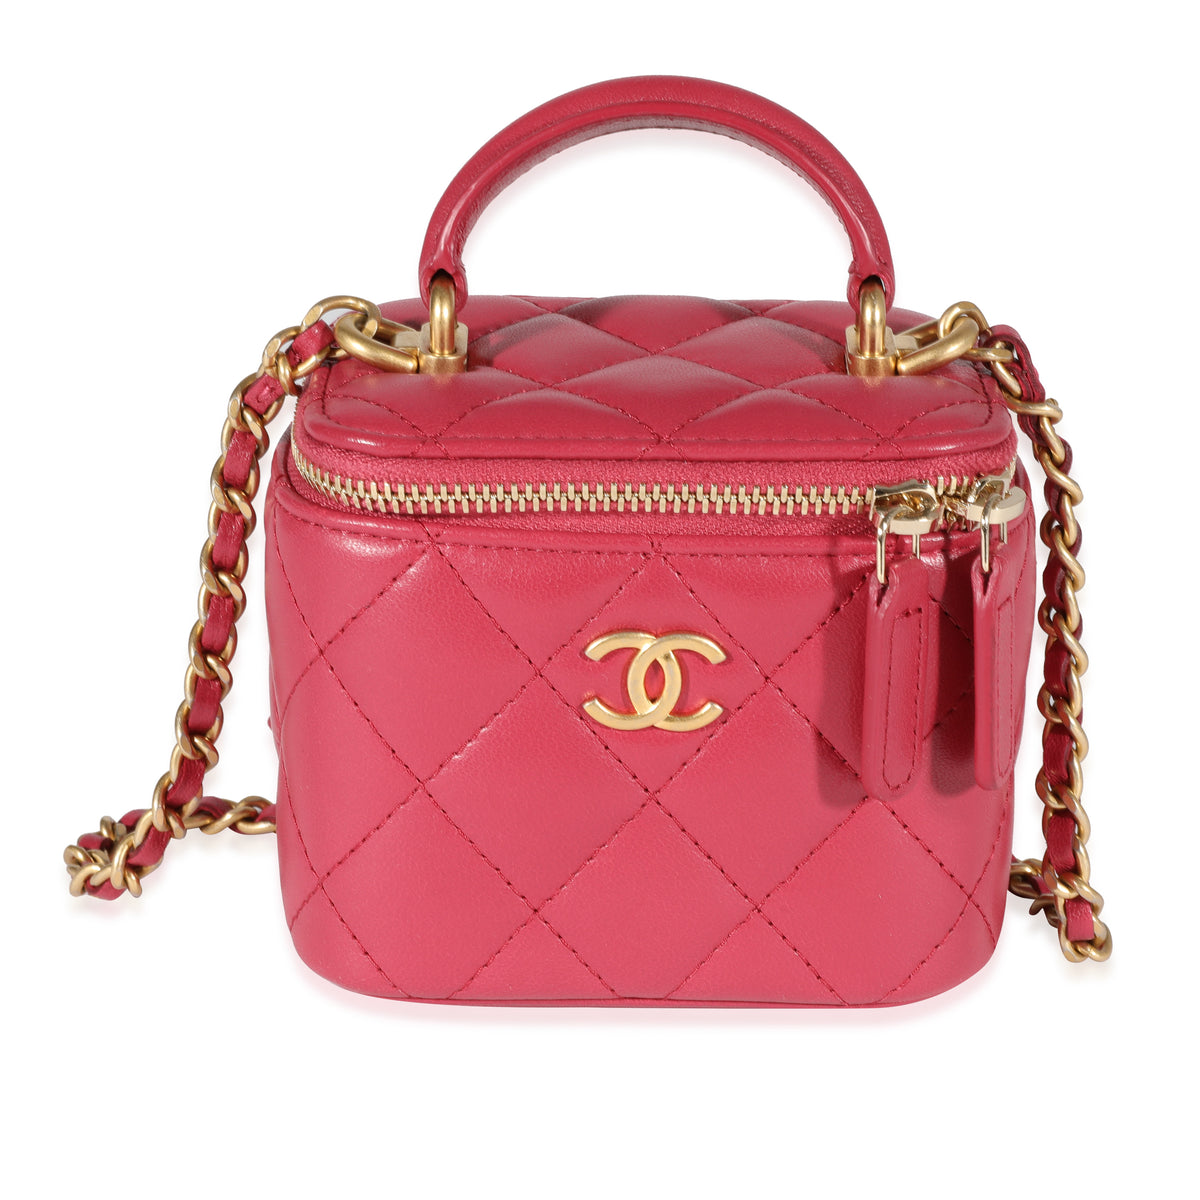 Chanel Raspberry Quilted Lambskin Mini Vanity Case with Chain, myGemma, SG